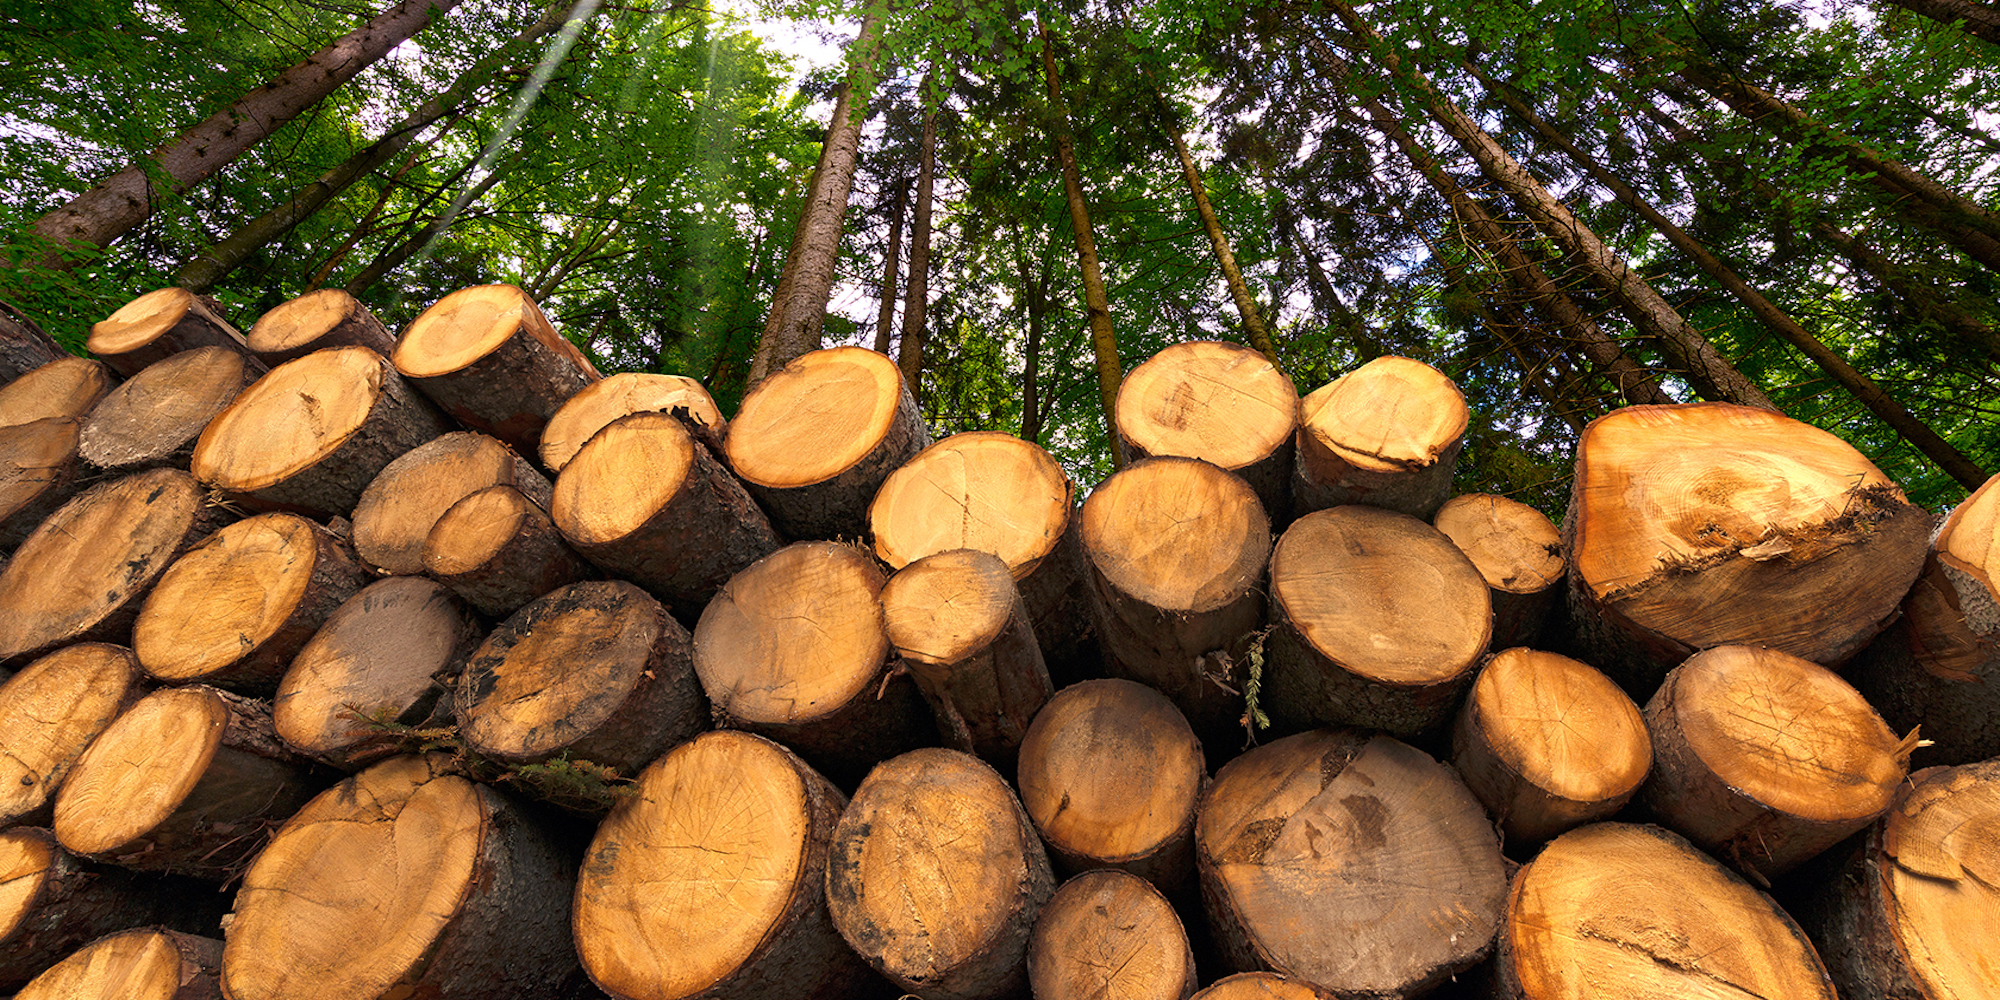 A pile of logs stretching from left to right in the image with tall trees looming far above with the canopy of the trees blocking out the sunlight.